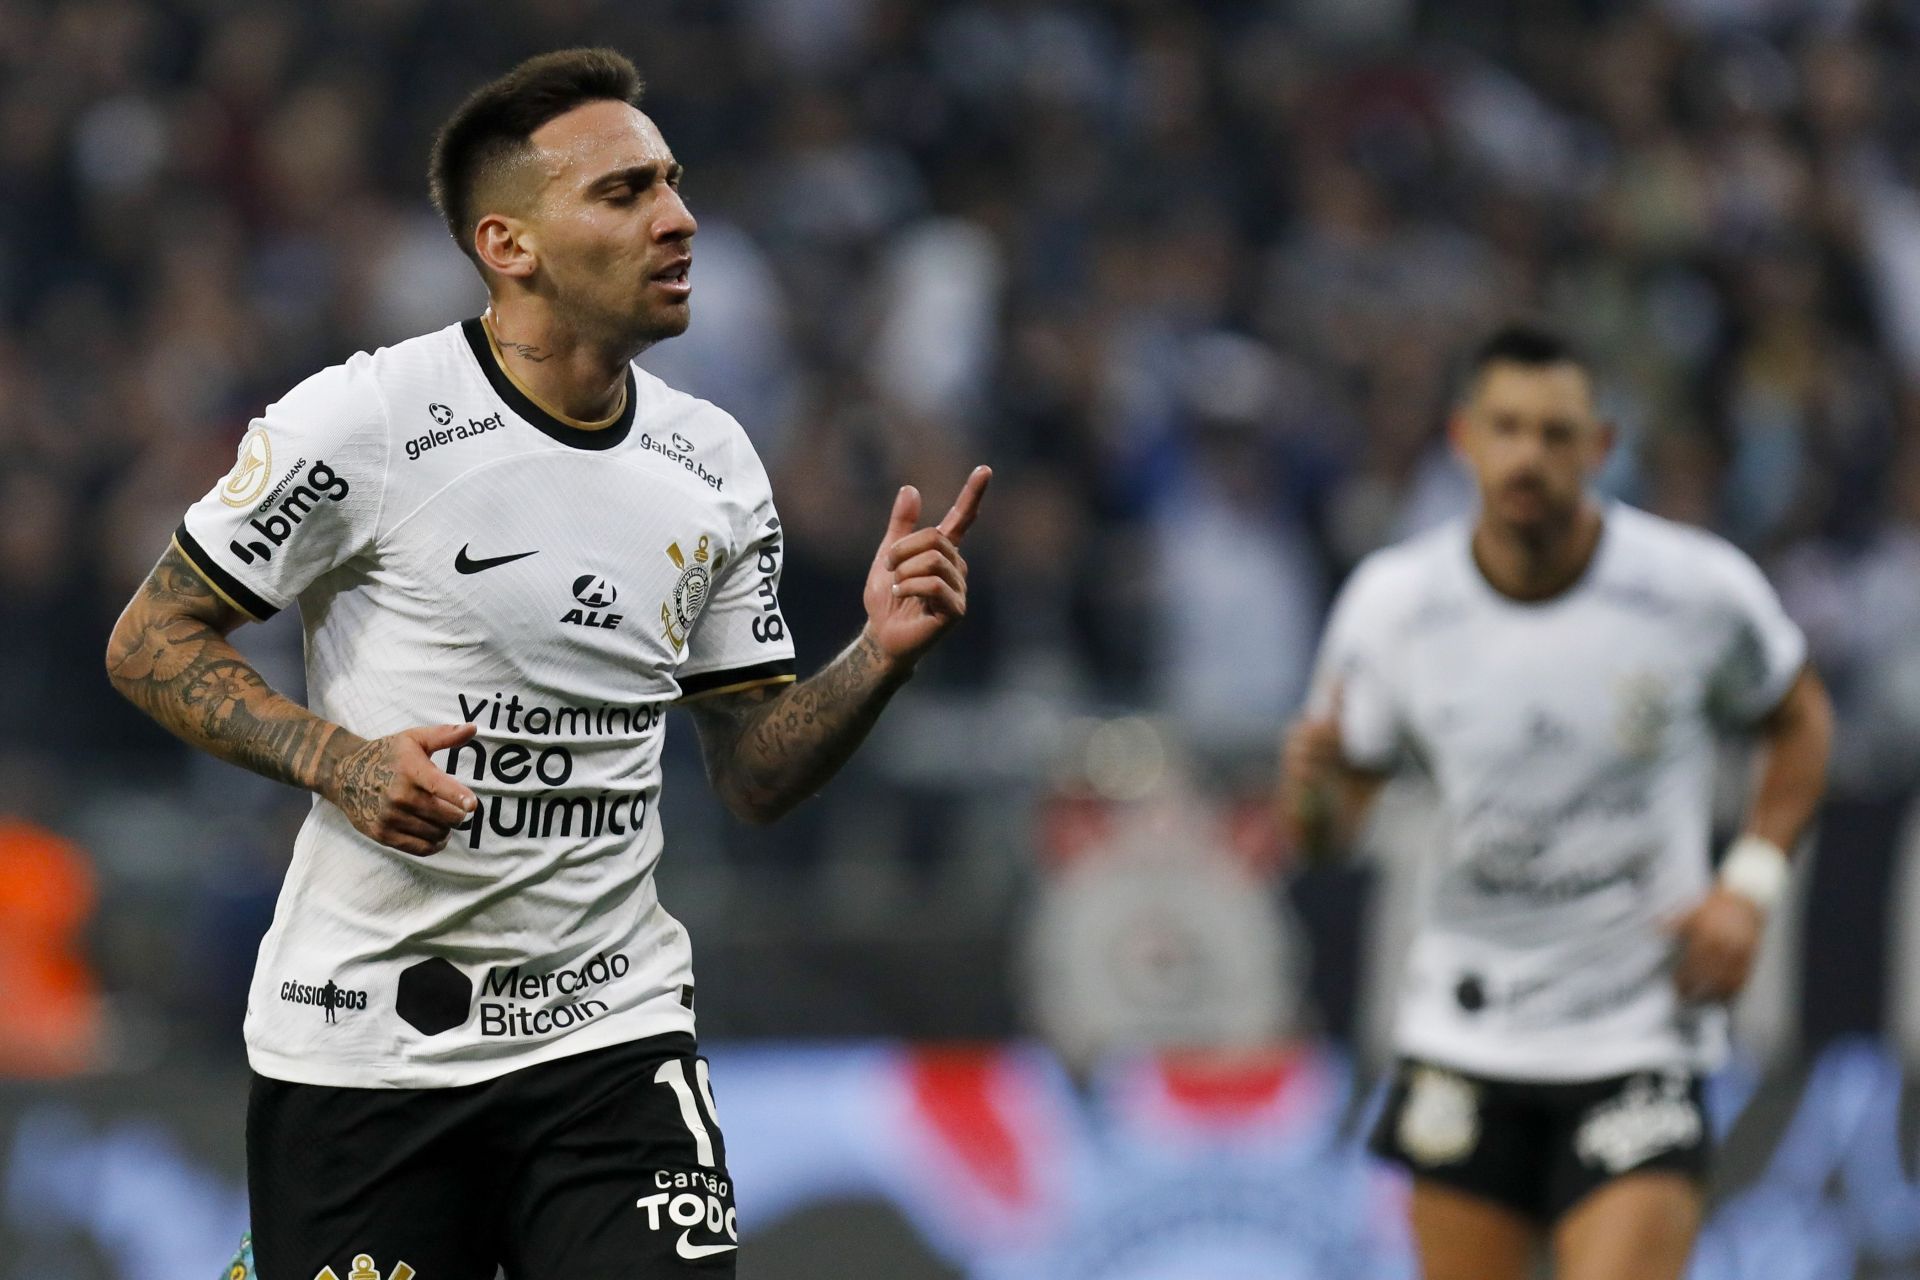 Corinthians and Flamengo square off in an all-Brazil Libertadores quarter-final fixture on Tuesday